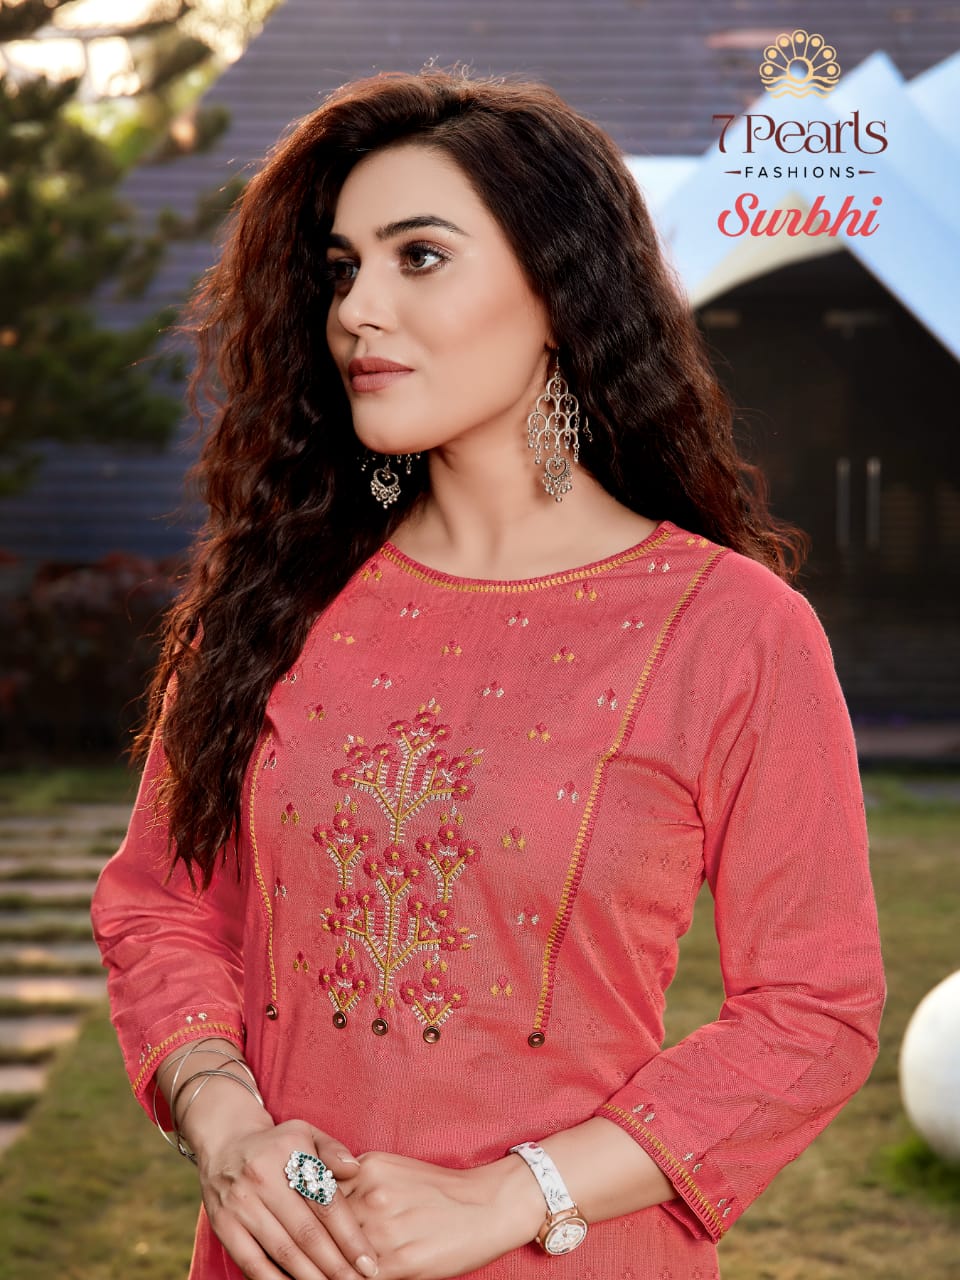 7 Pearls Launch Surbhi Pure Cotton Kurti With Pant For Girls Collections In Surat Market